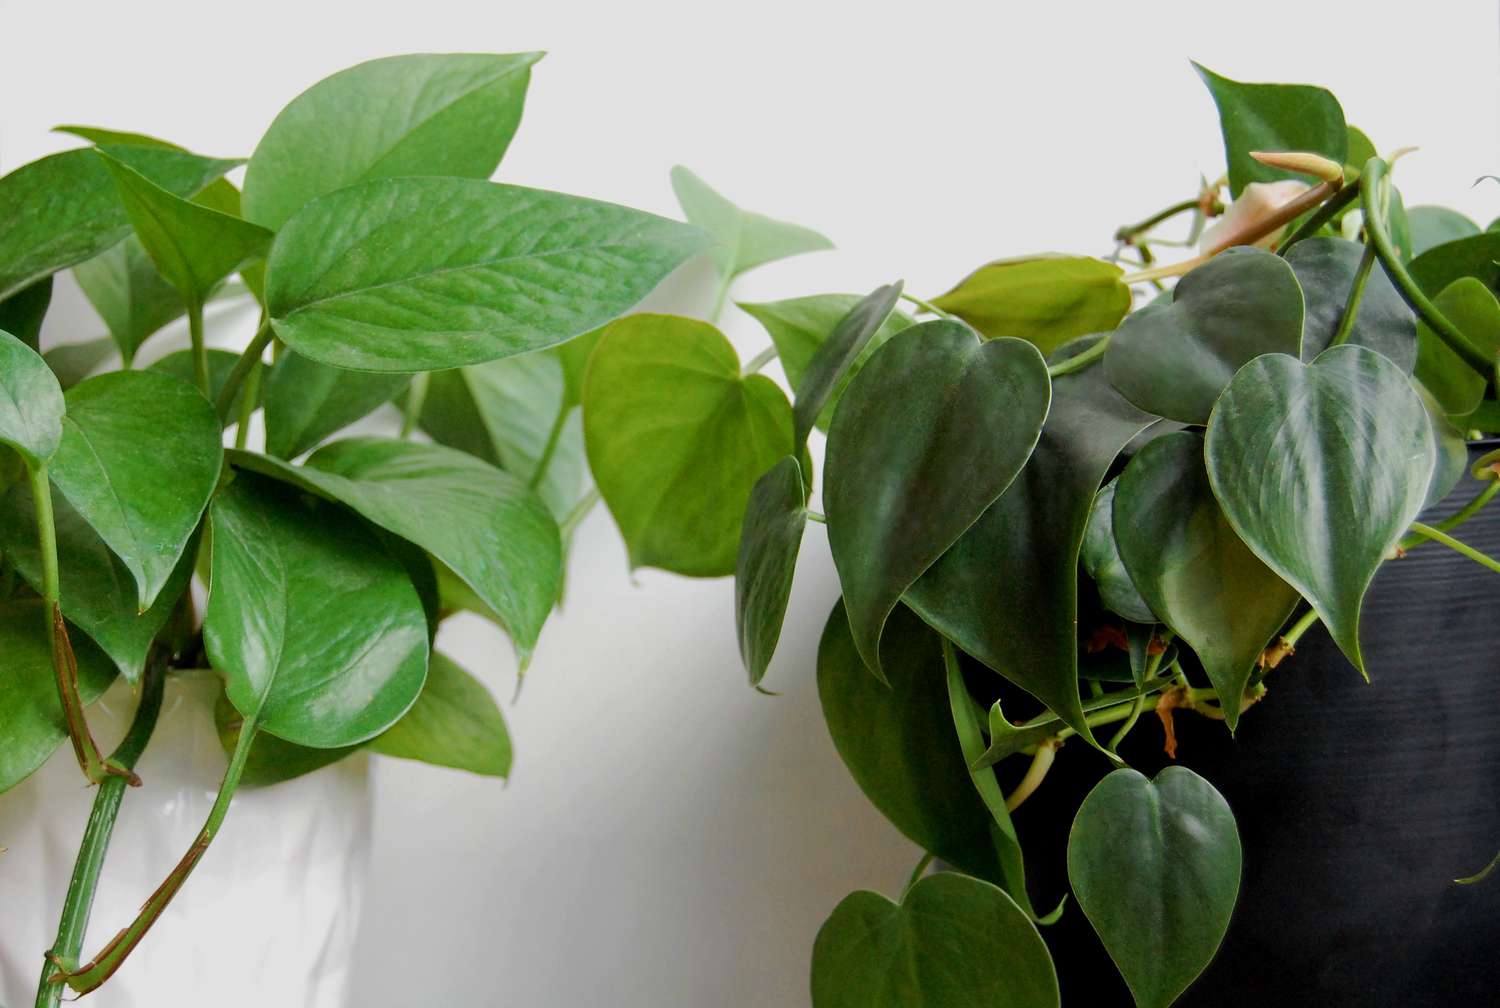 A green pothos in a white pot pot sits next to a heart-leaf philodendron in a black pot.